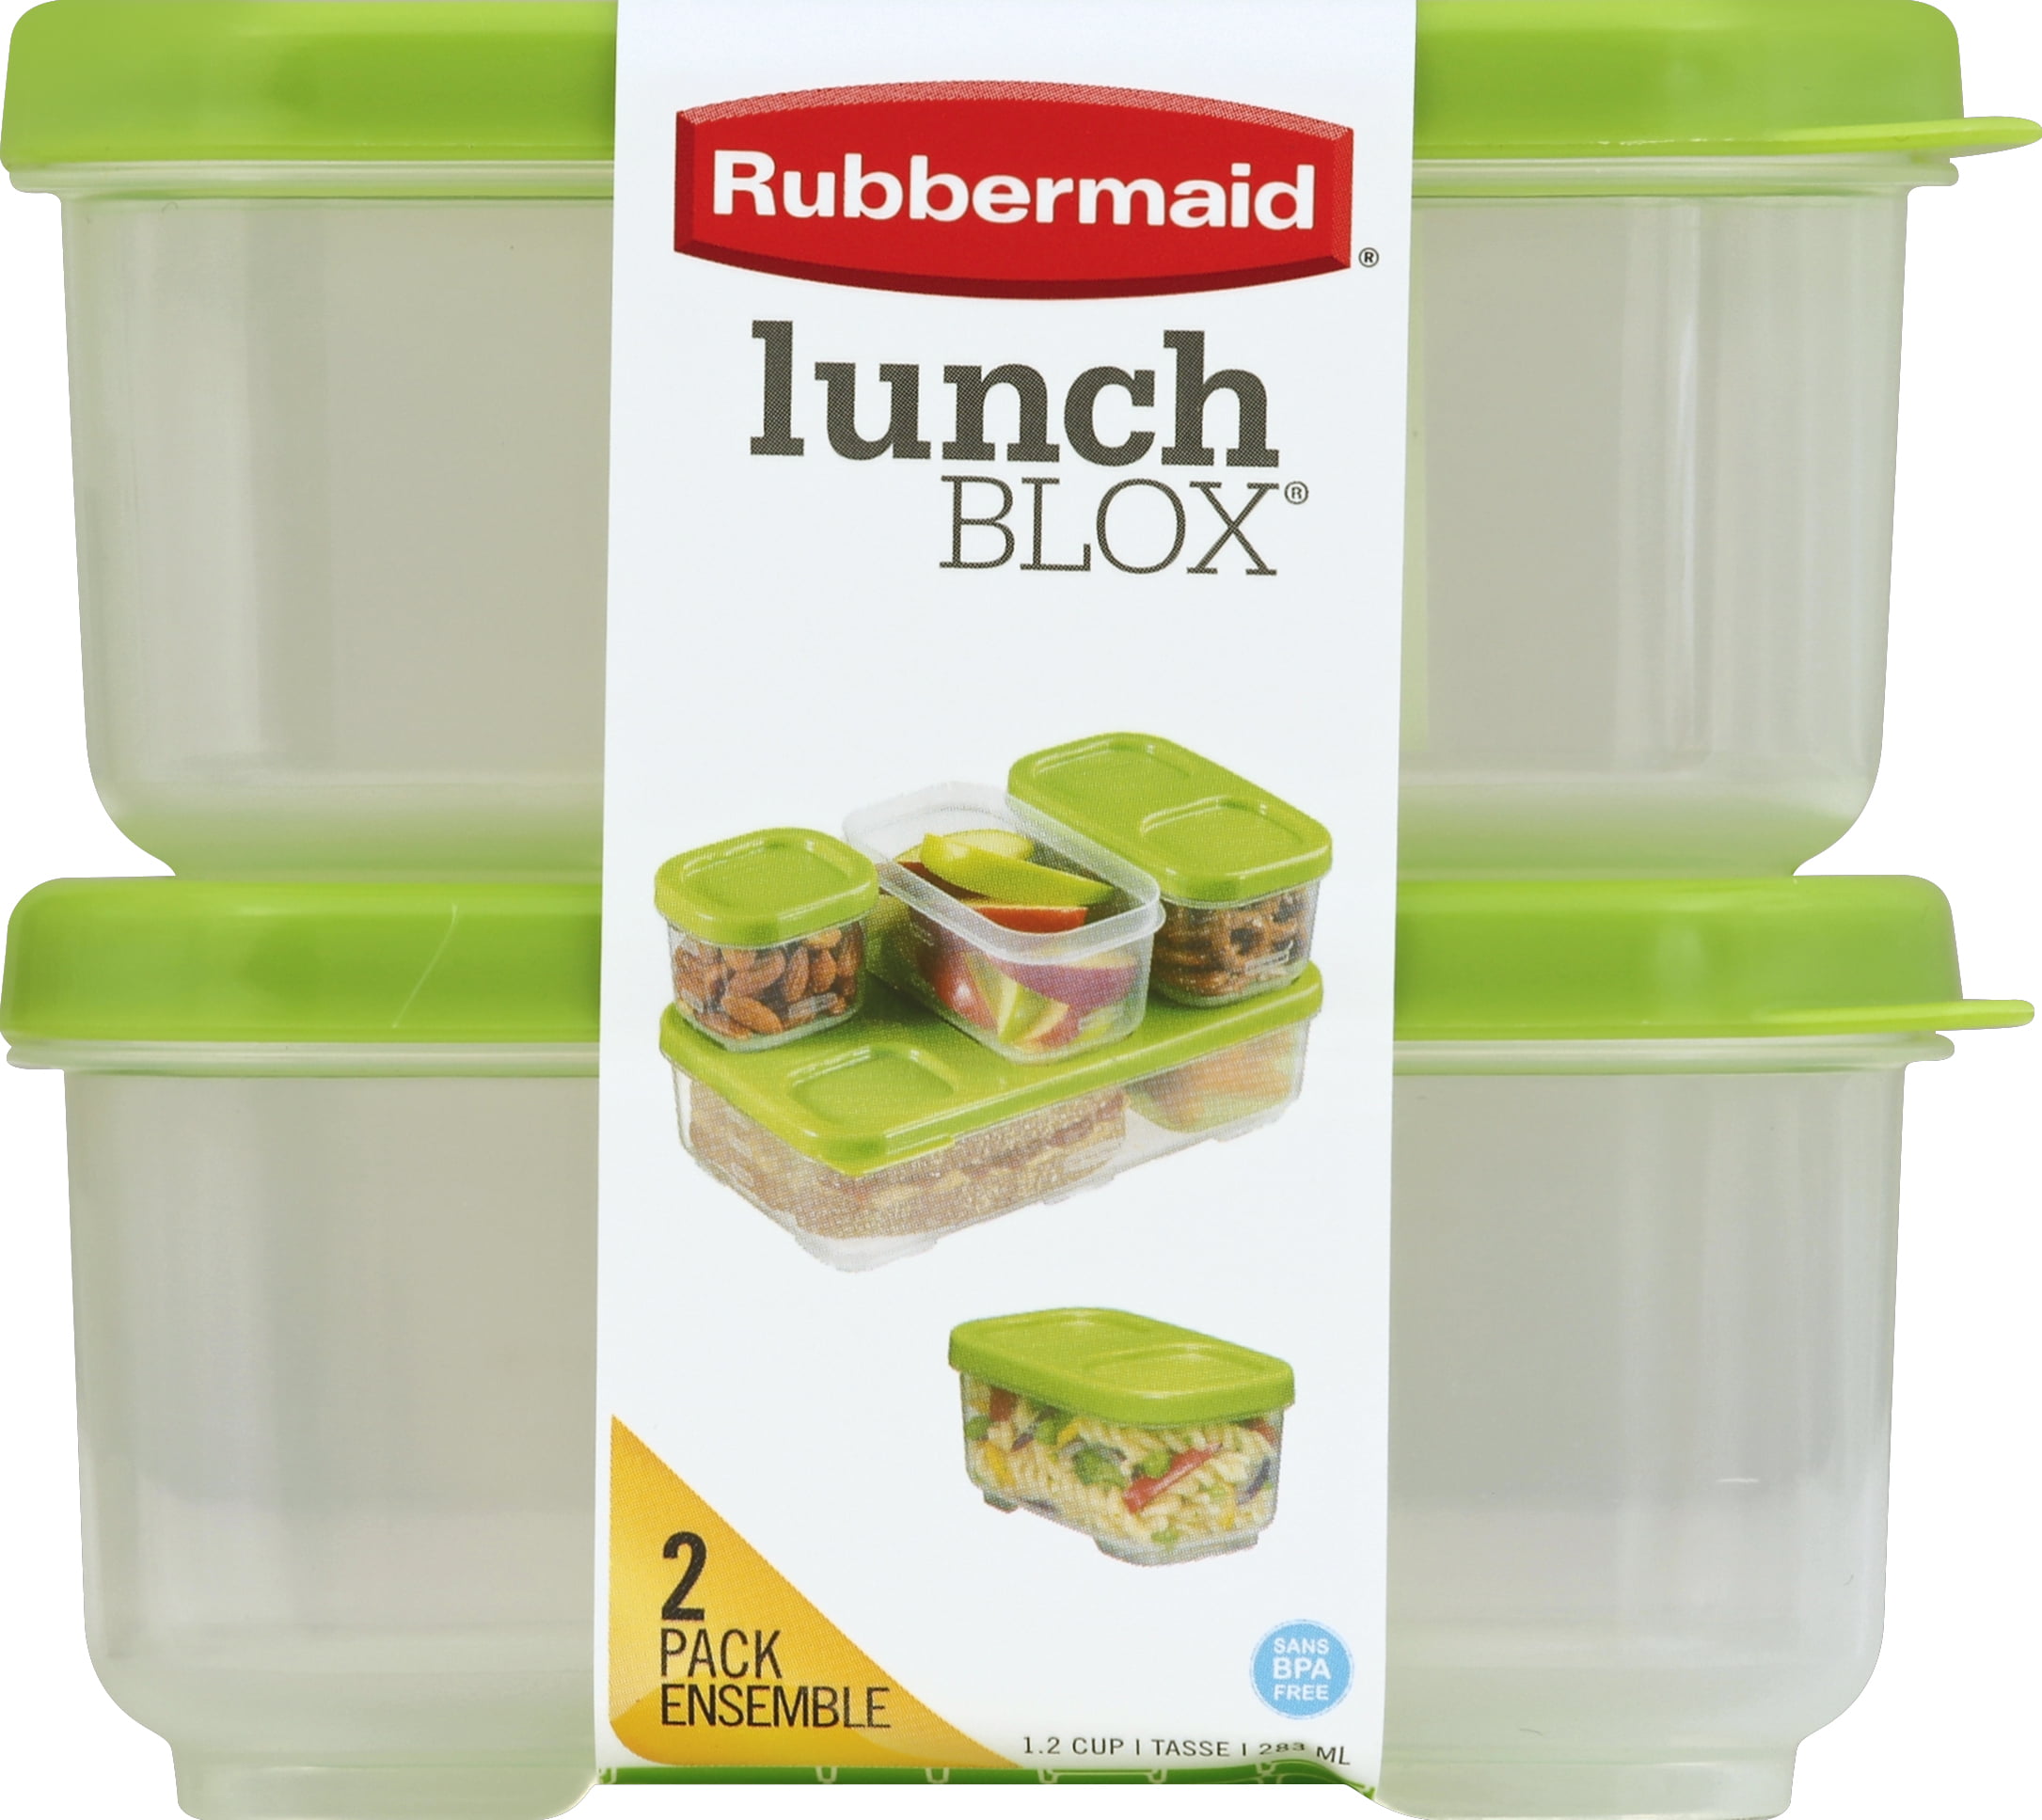 Rubbermaid Lunch Blox Entree Kit - Shop Food Storage at H-E-B